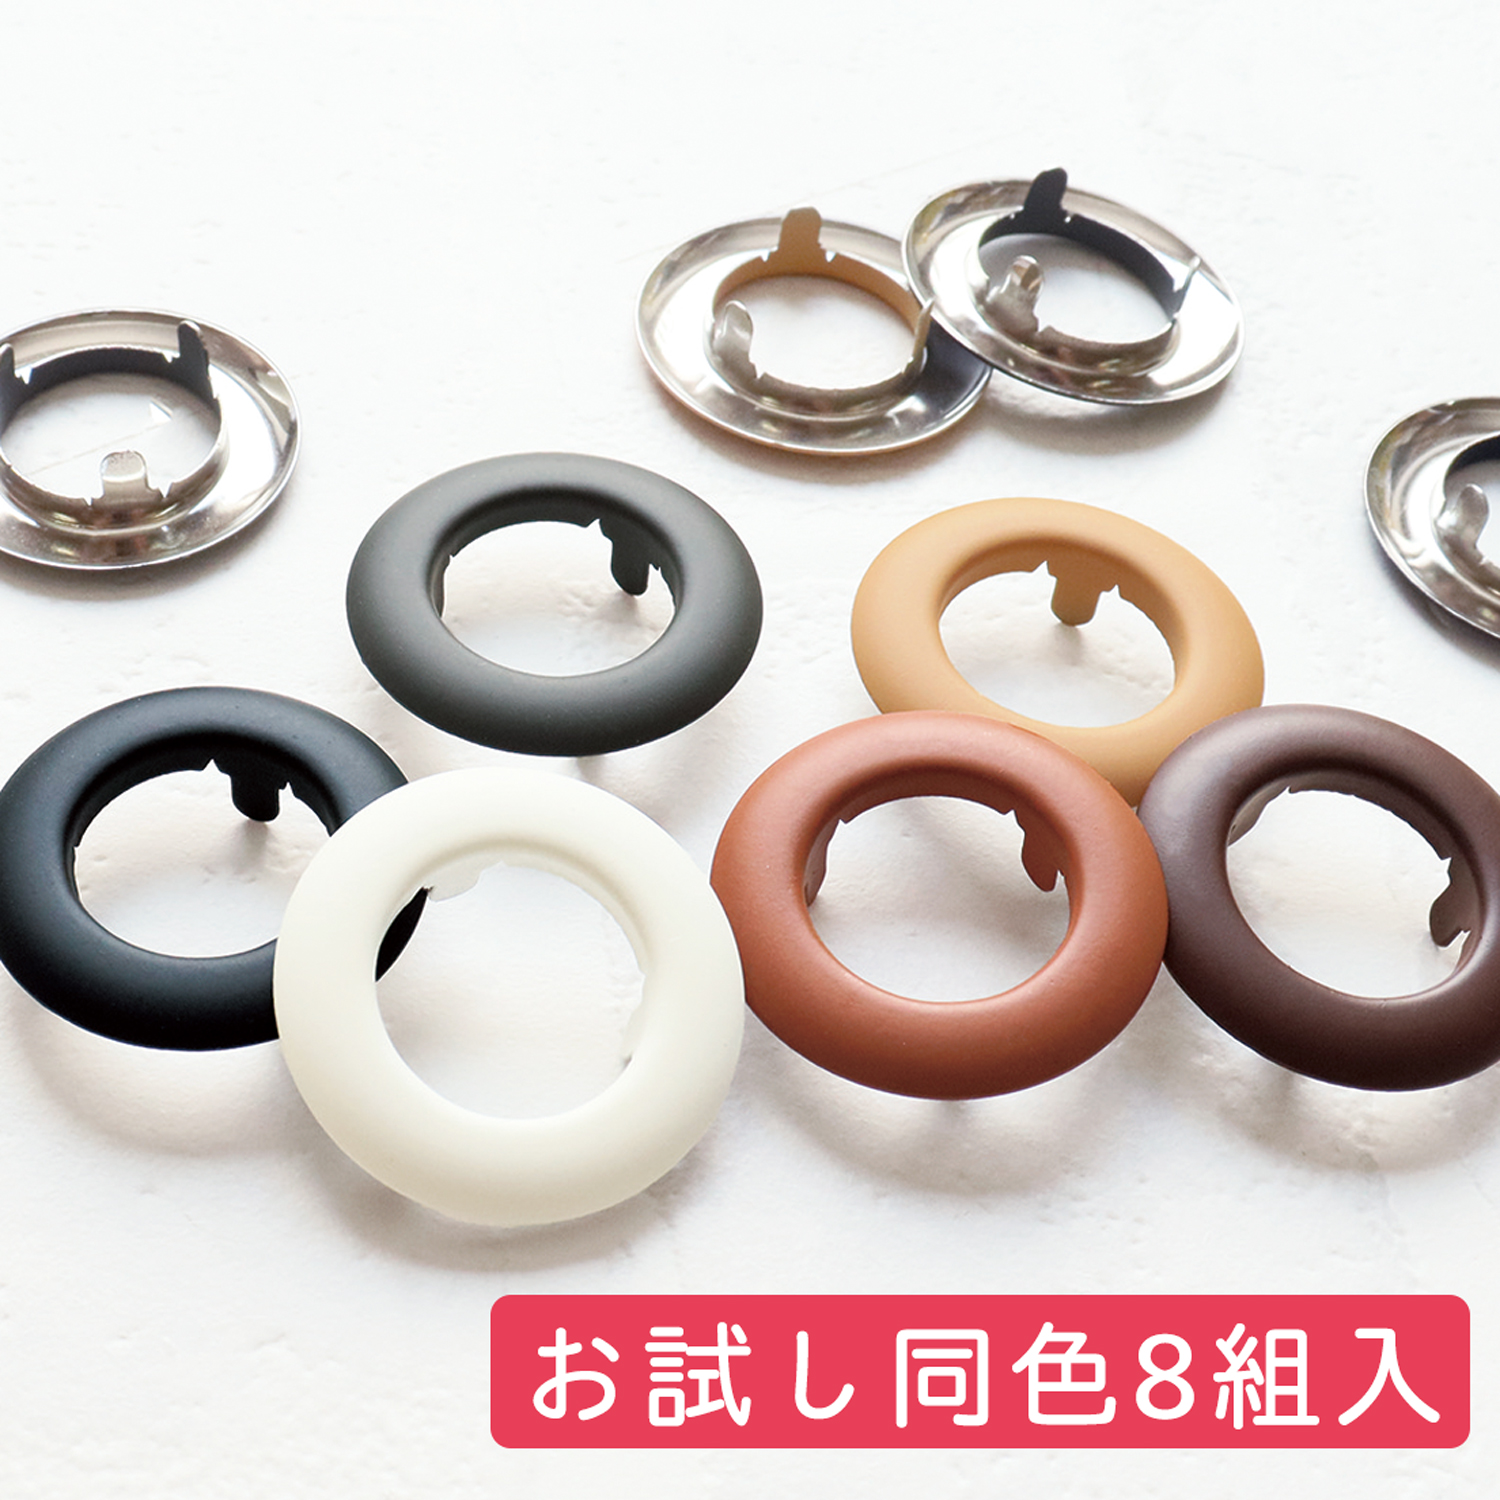 F5-8SET Claw-type Eyelets with Leather Finish Trial Set 8 pairs (pack)